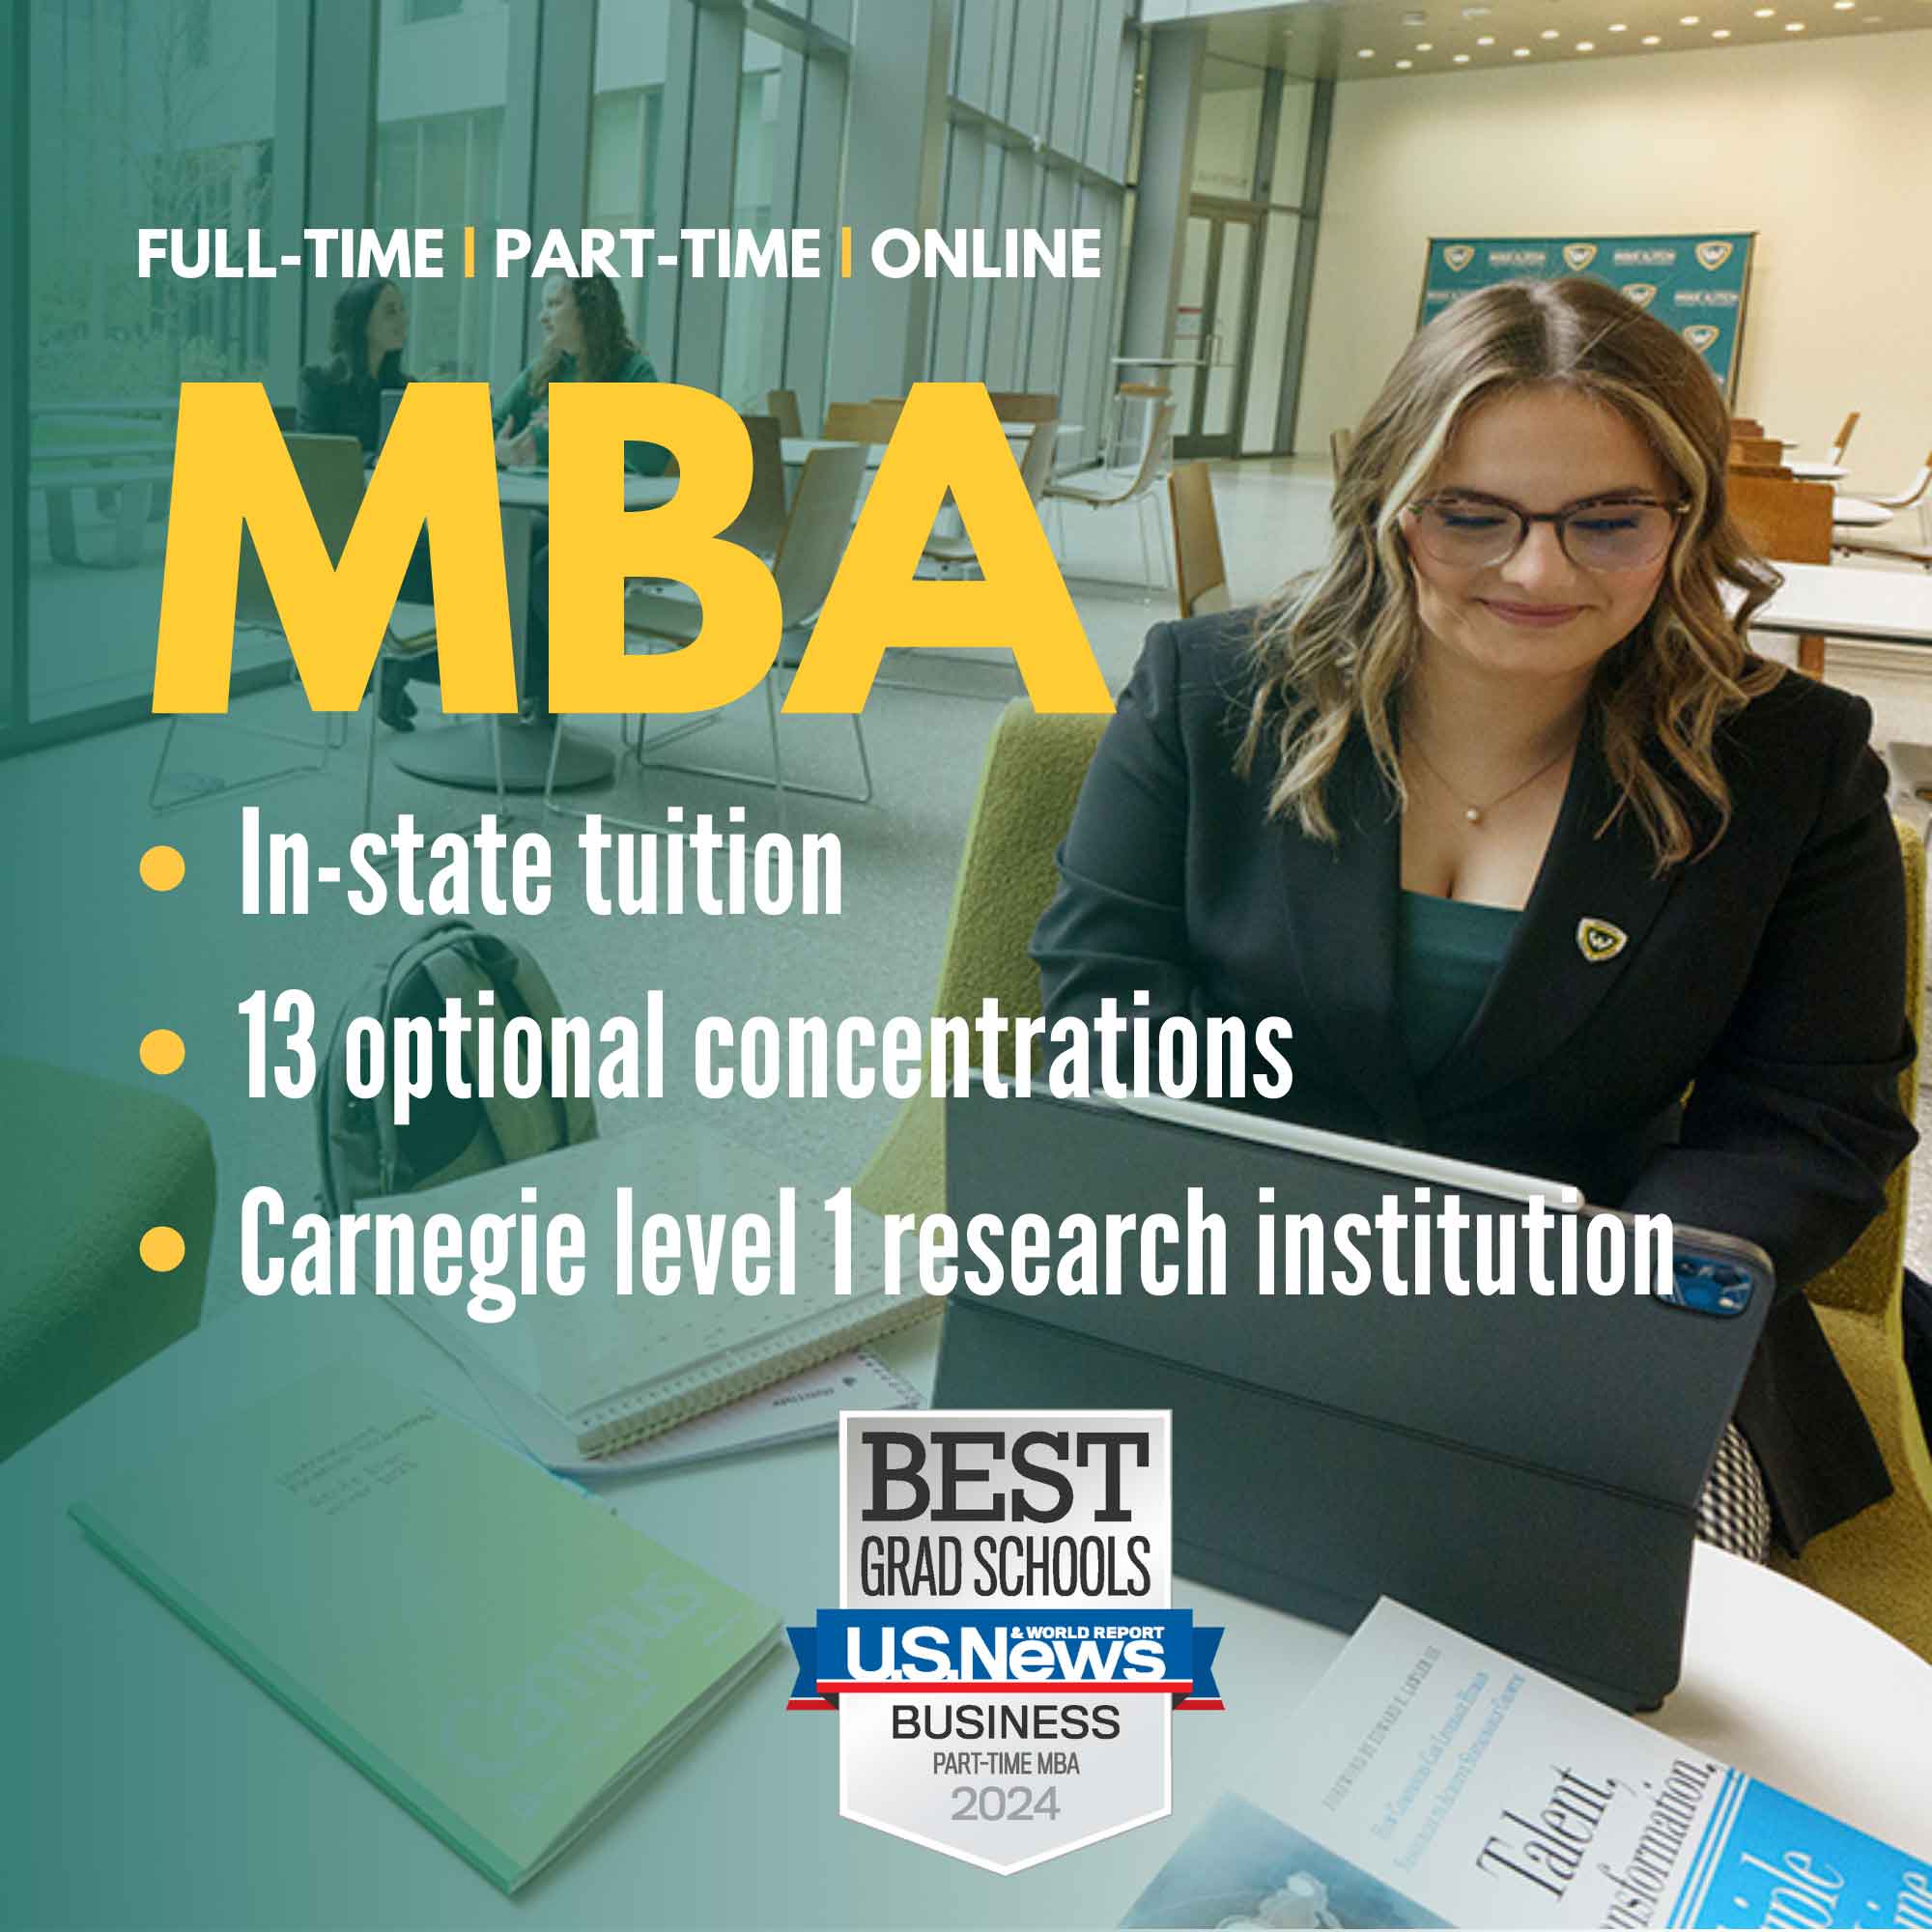 Accredited, flexible and cost-effective MBA program online modality puts your career goals within reach. 